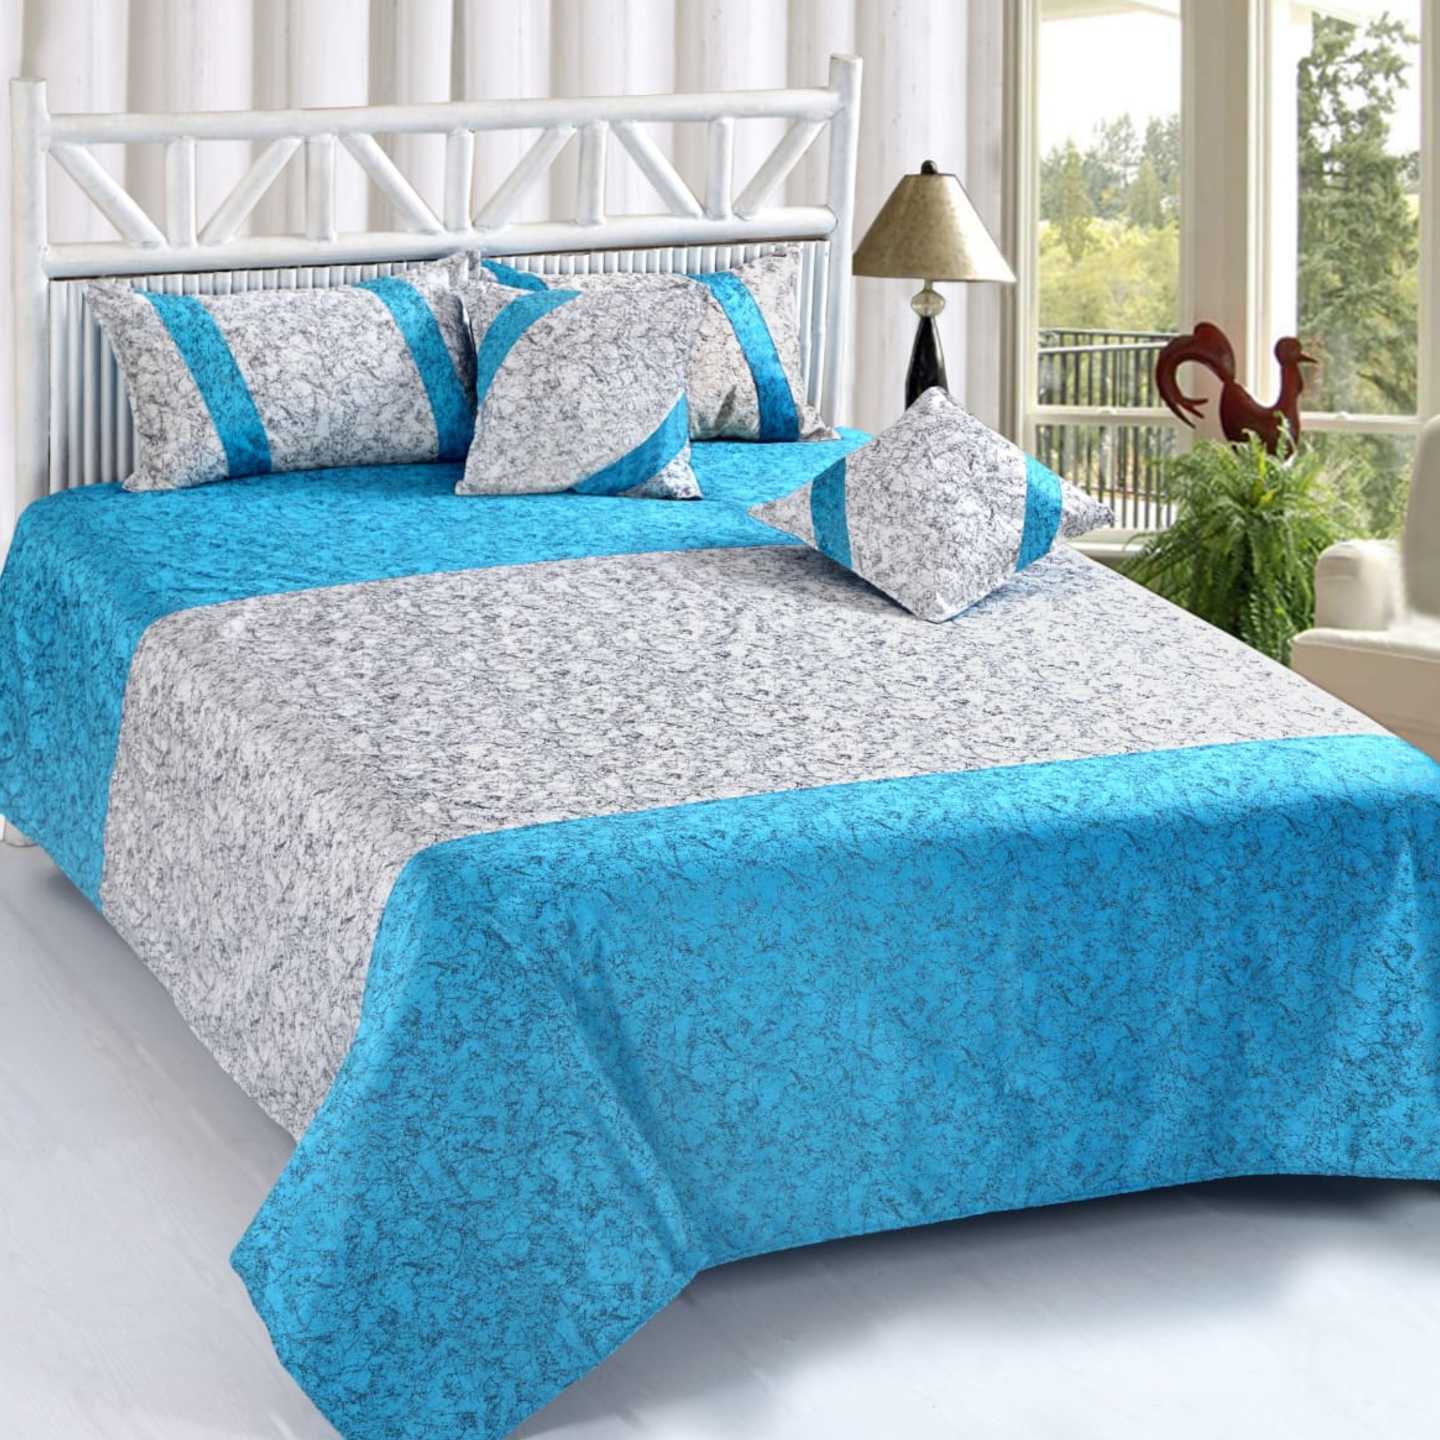 Handtex Home Double BedsheetPreimum Velvet Double Bedsheet,2 cushion cover and 2 pillow cover